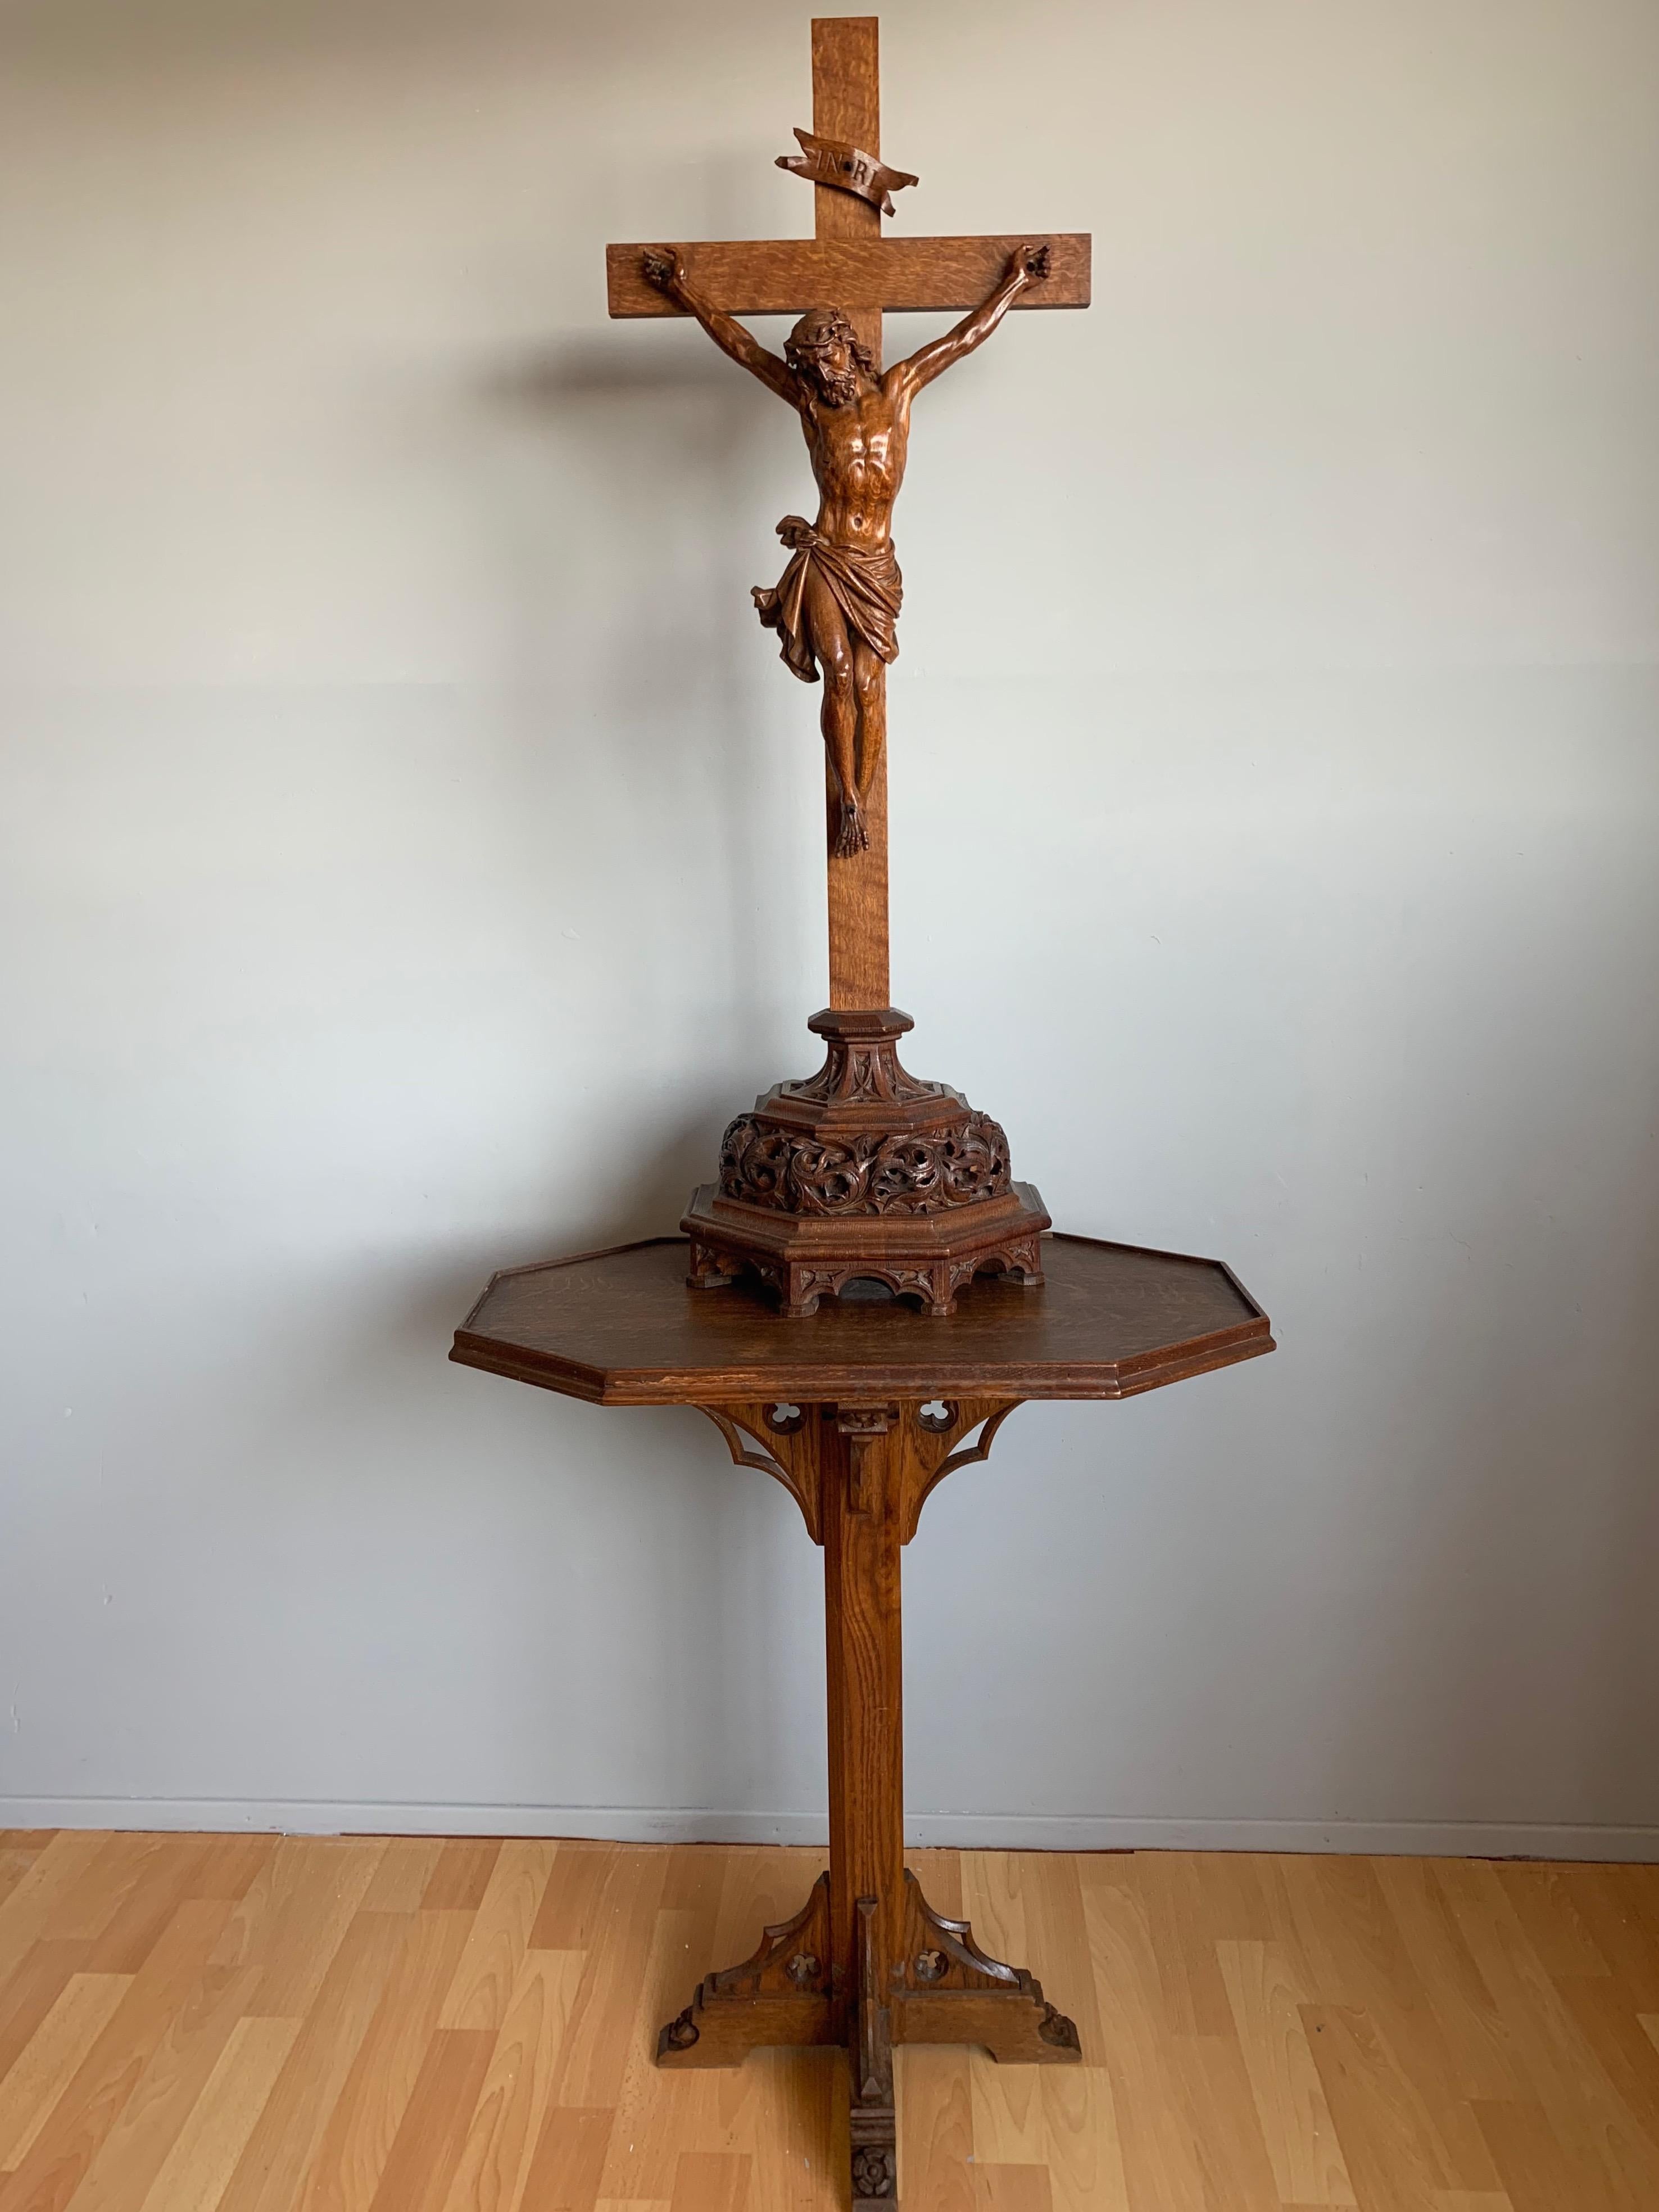 Good size and one of the best detailed church crucifixes you will ever see. 

This incredibly beautiful and sizable Gothic Art crucifix is all hand carved and signed by the artist Malfait. Also from the collection of a former collector of religious